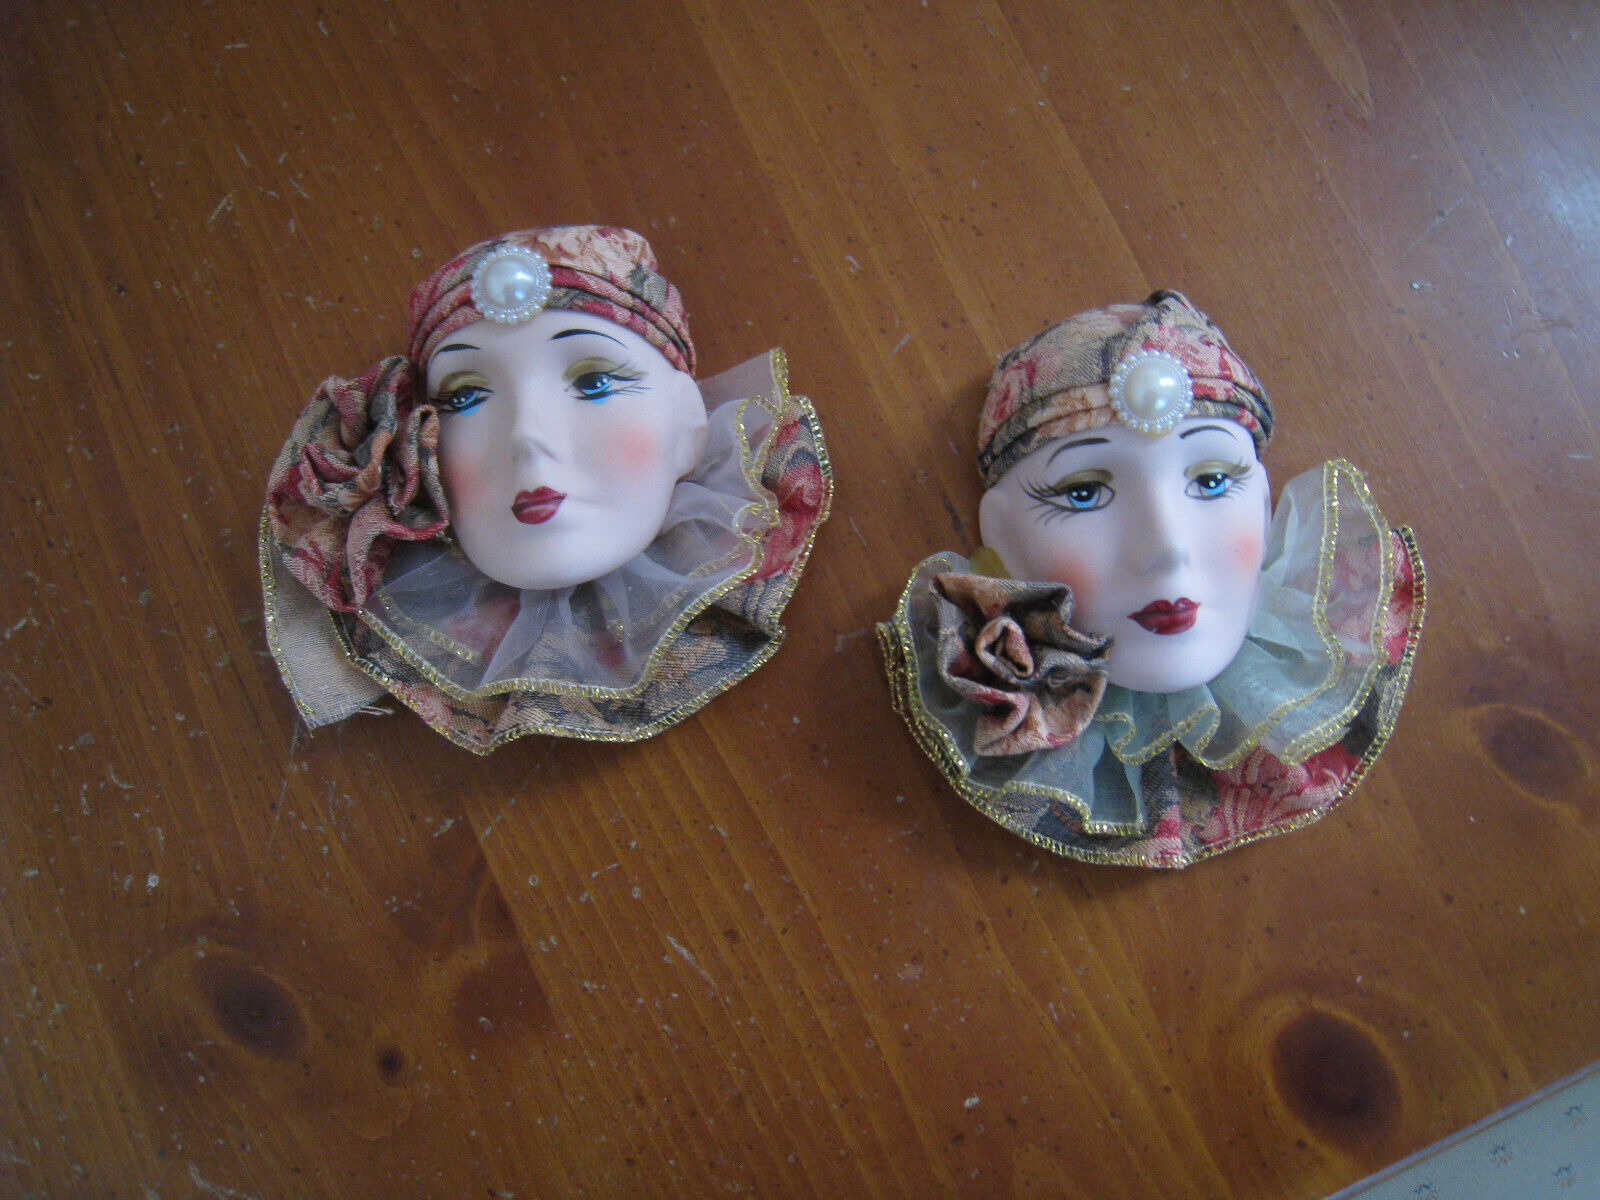 2 Vintage Ceramic Wall Mount Lady Pearl Headress Bust Wall Decor Aprox 5 x 5 in.